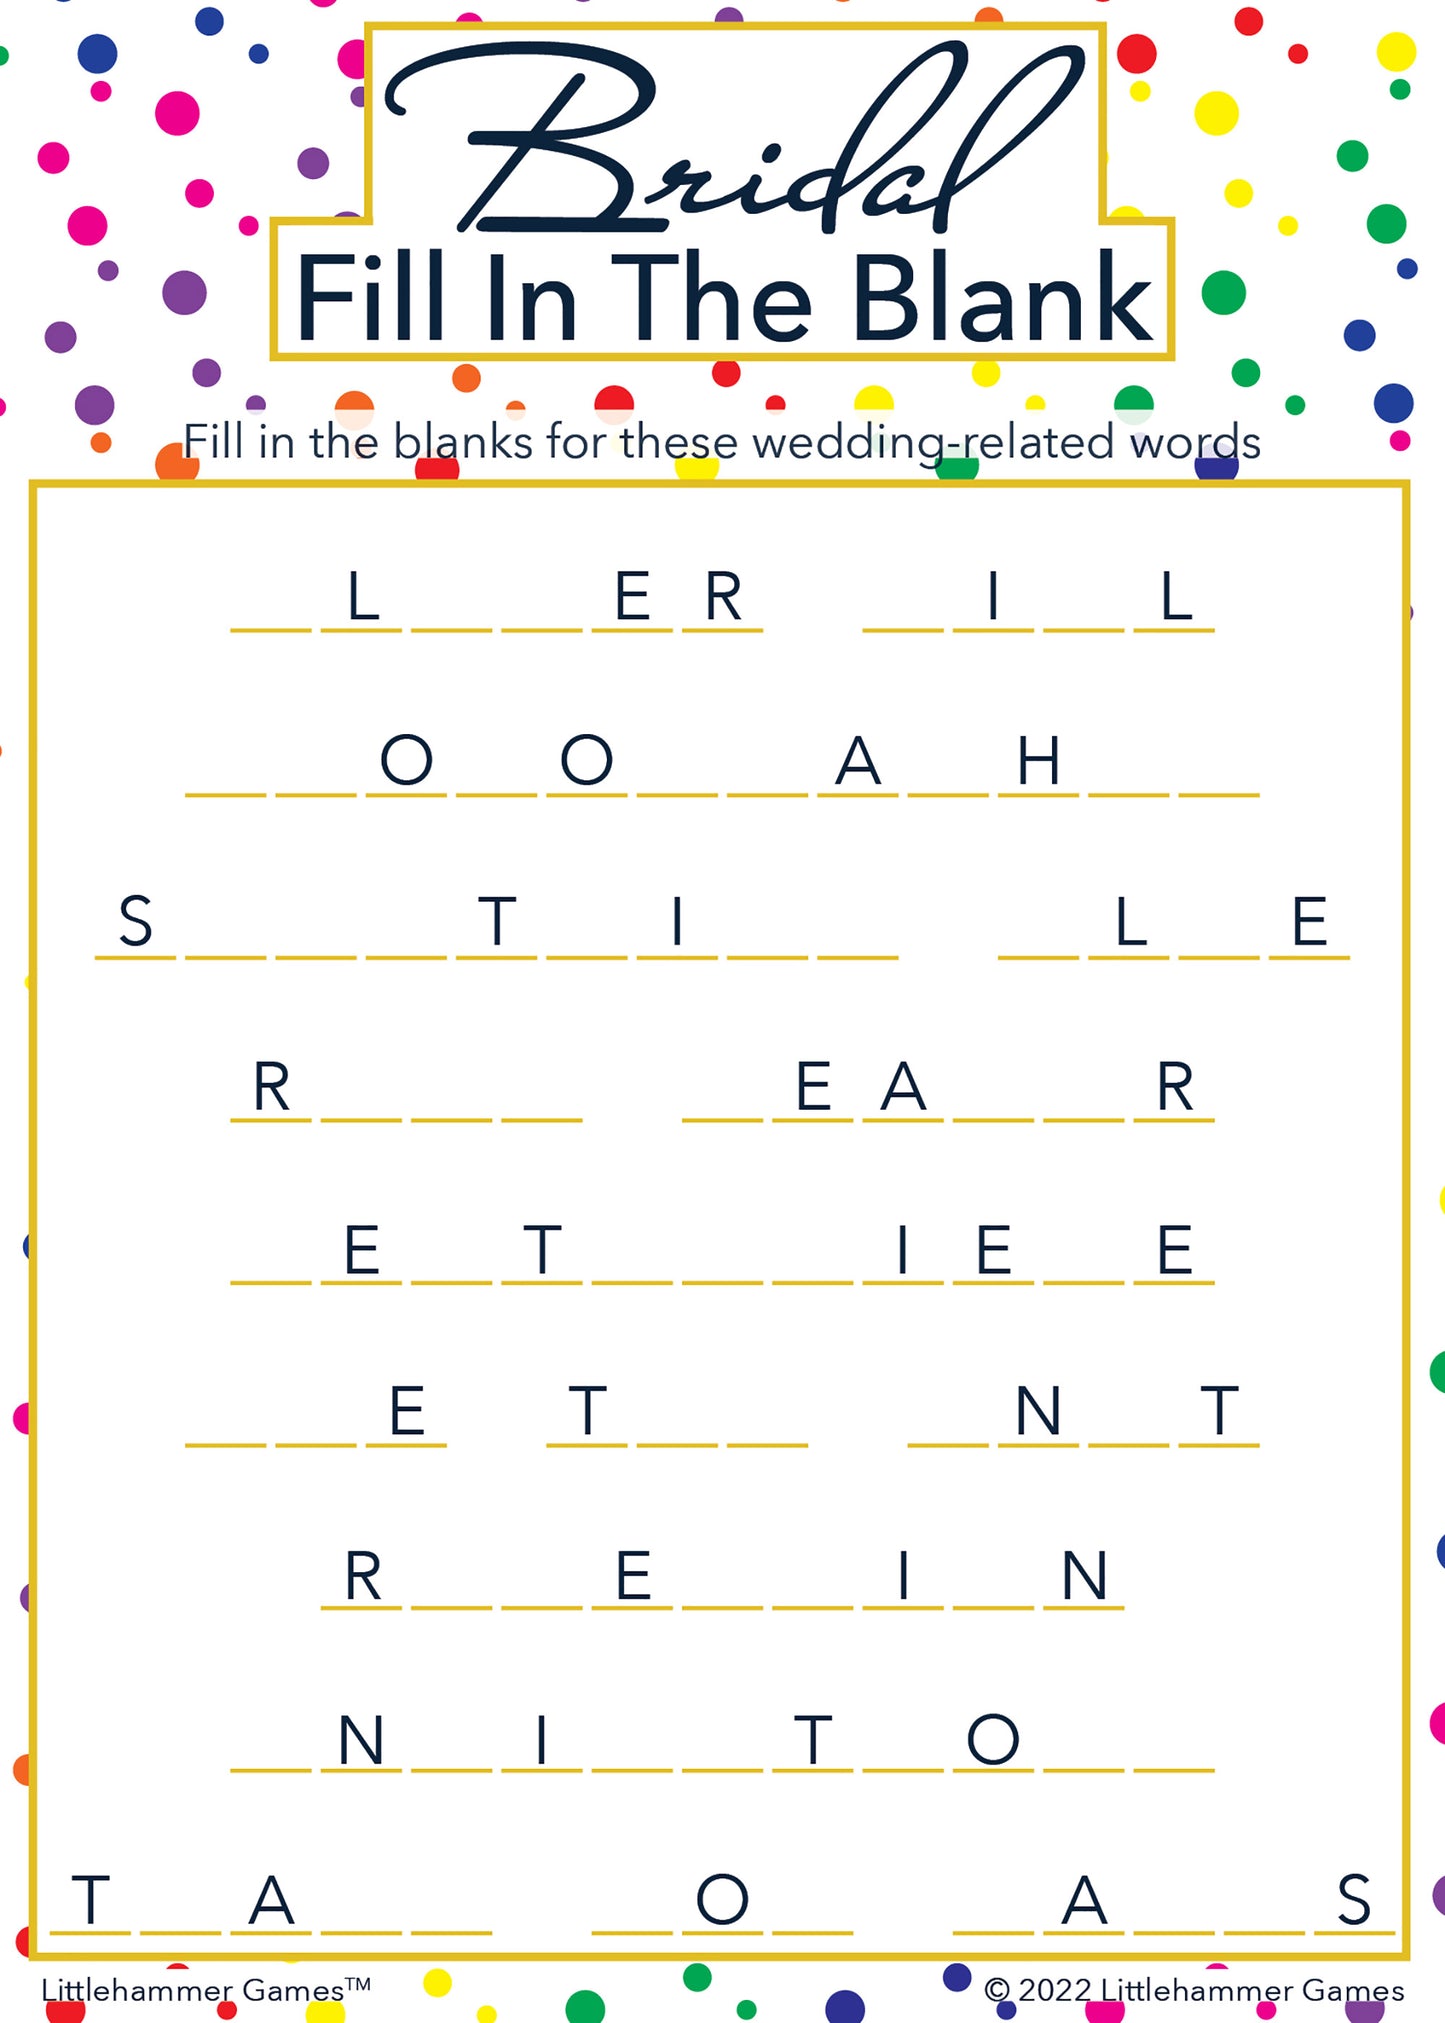 Bridal Fill in the Blank game card with a rainbow polka dot background